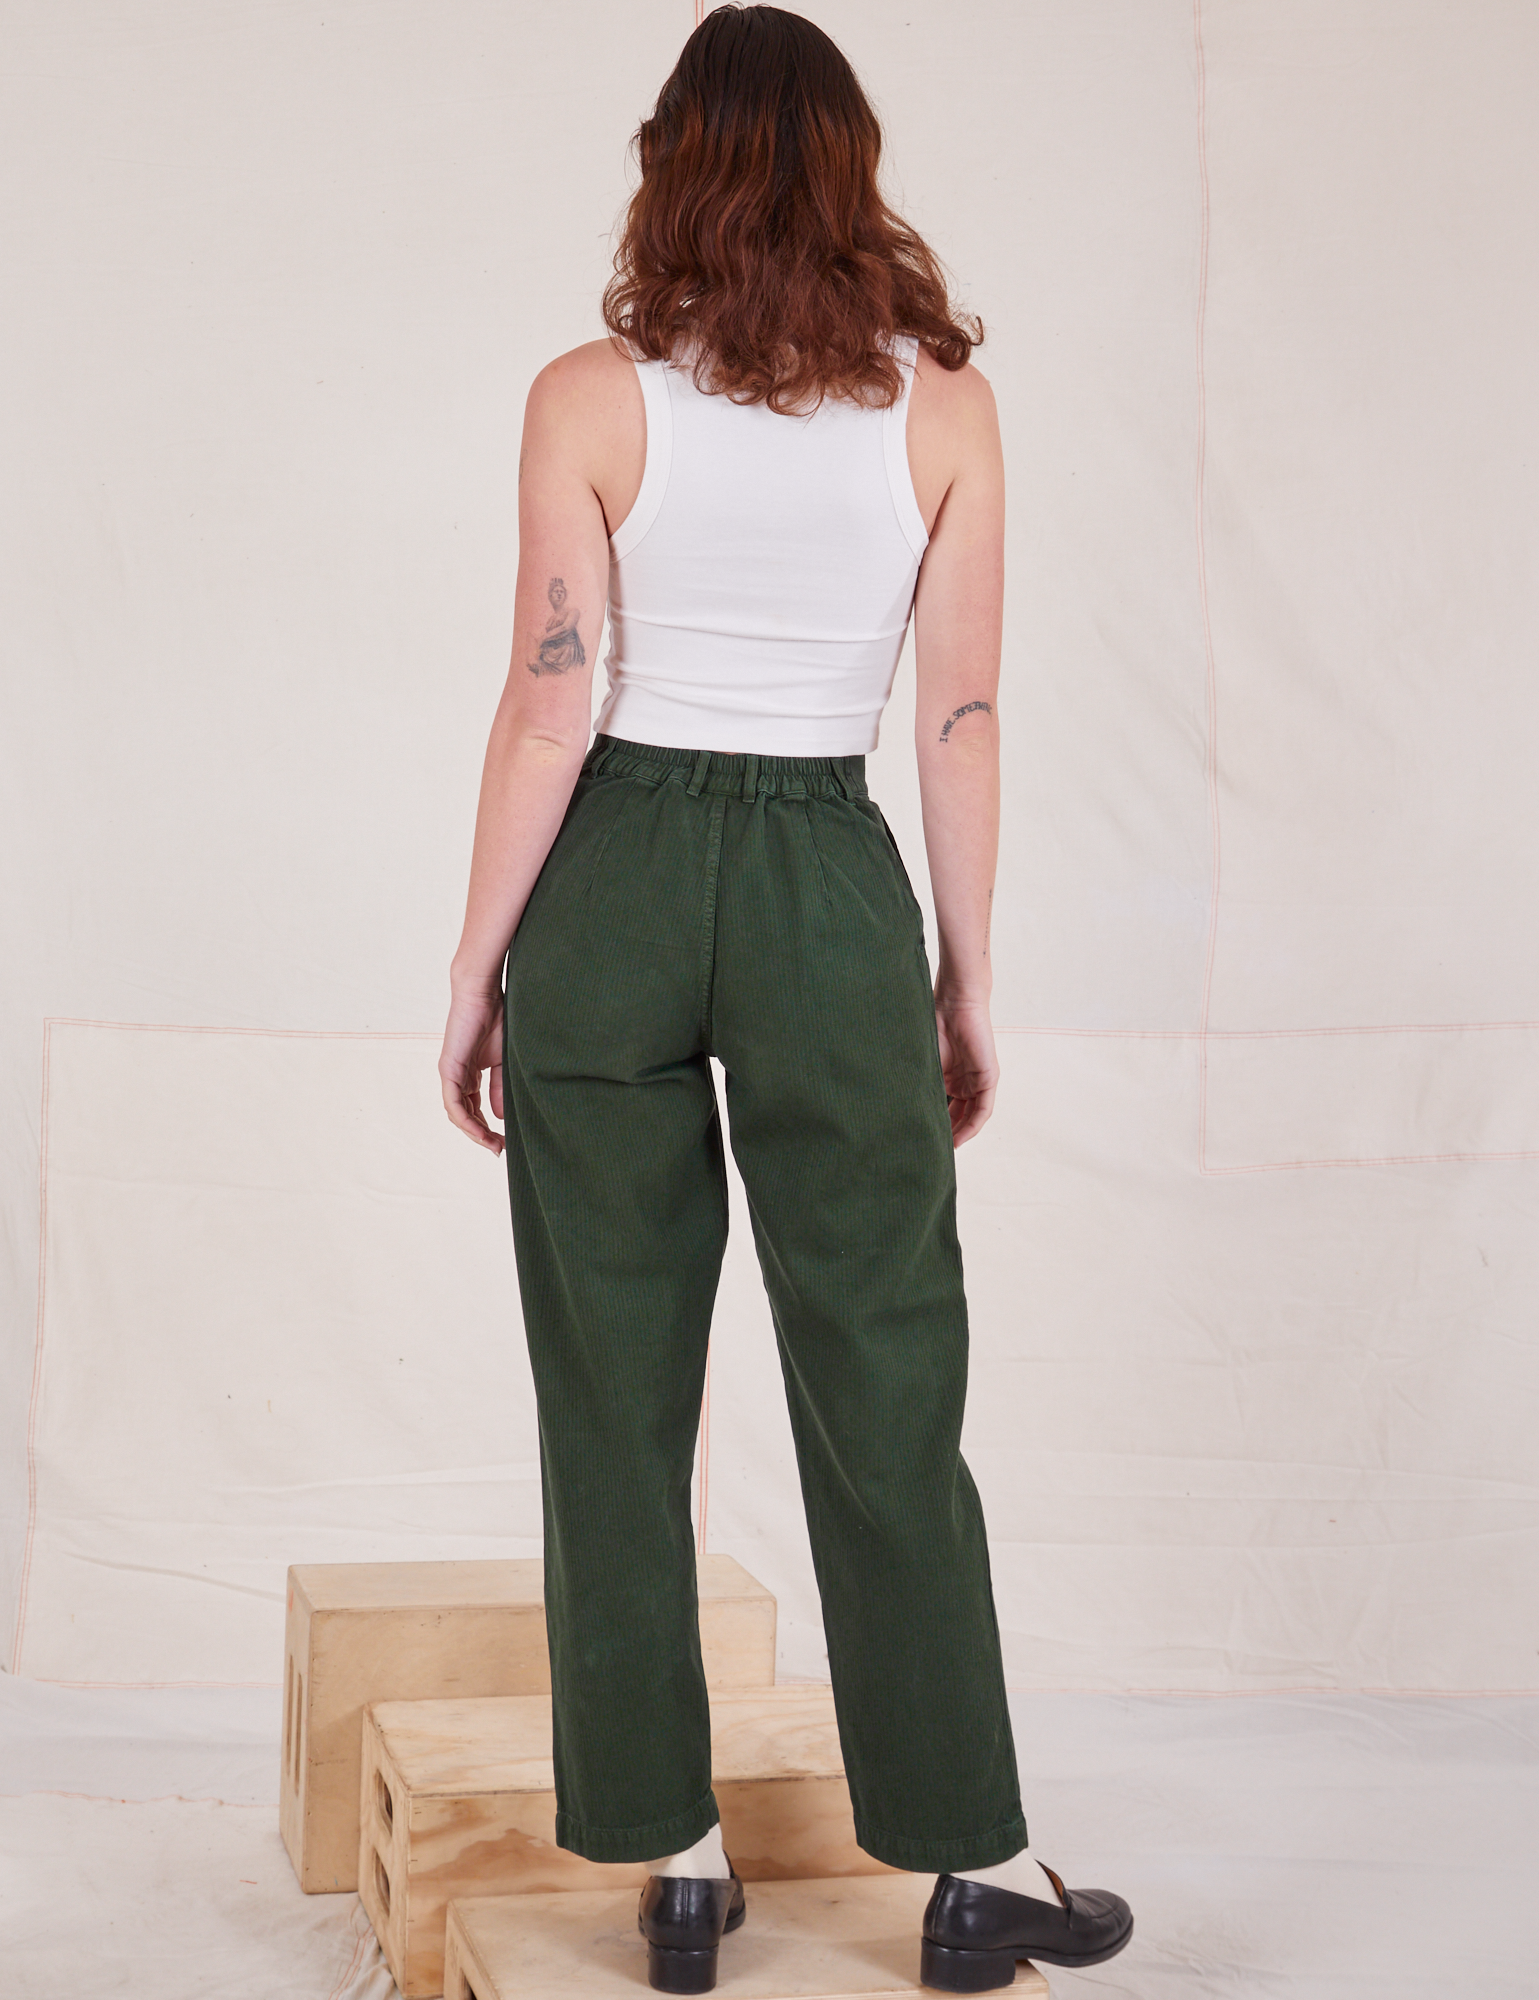 Back view of Heritage Trousers in Swamp Green and Cropped Tank Top in vintage tee off-white on Alex